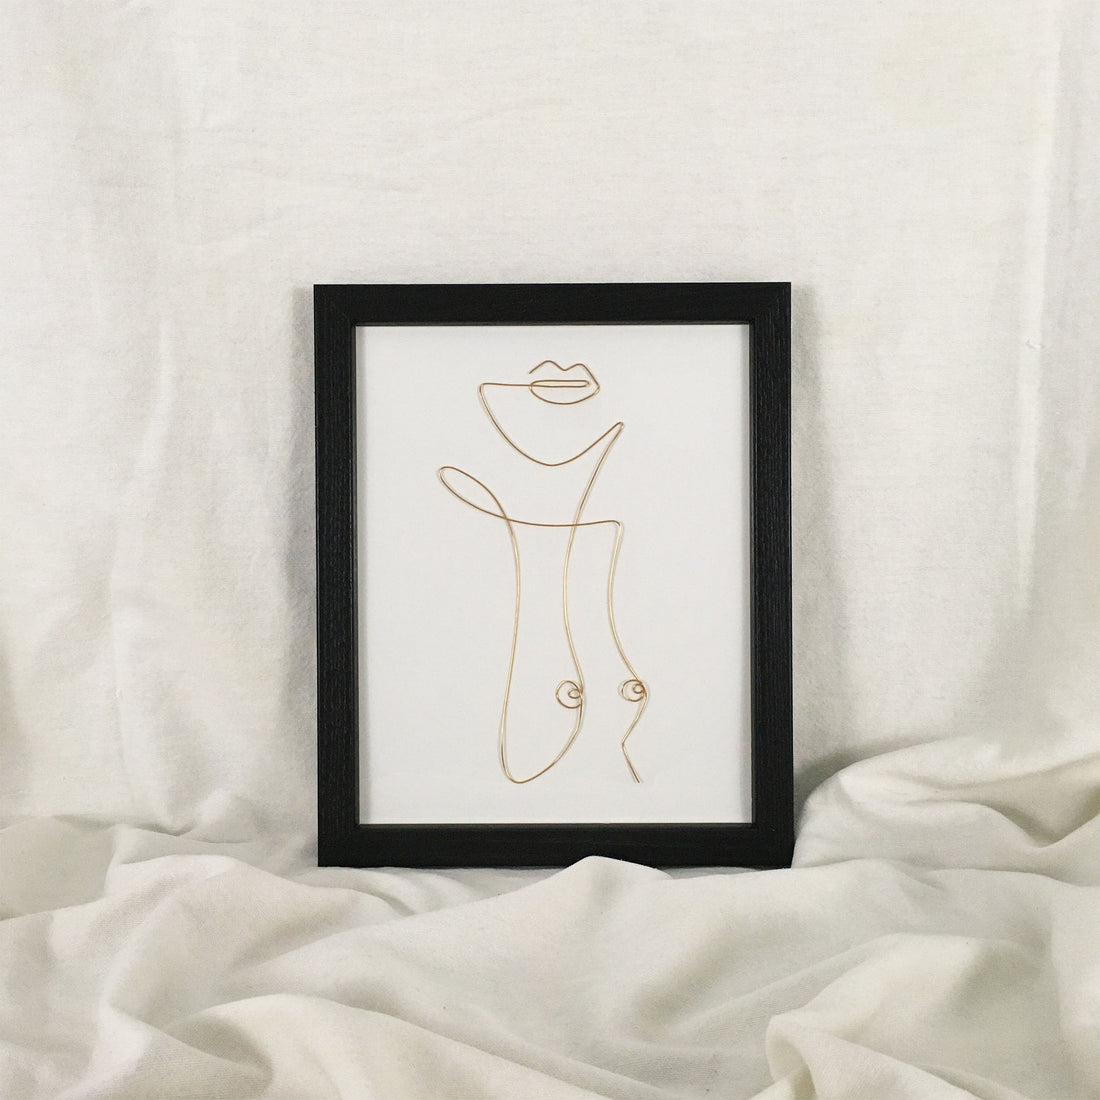 Uncovered Wire Art - black frame, gold wire